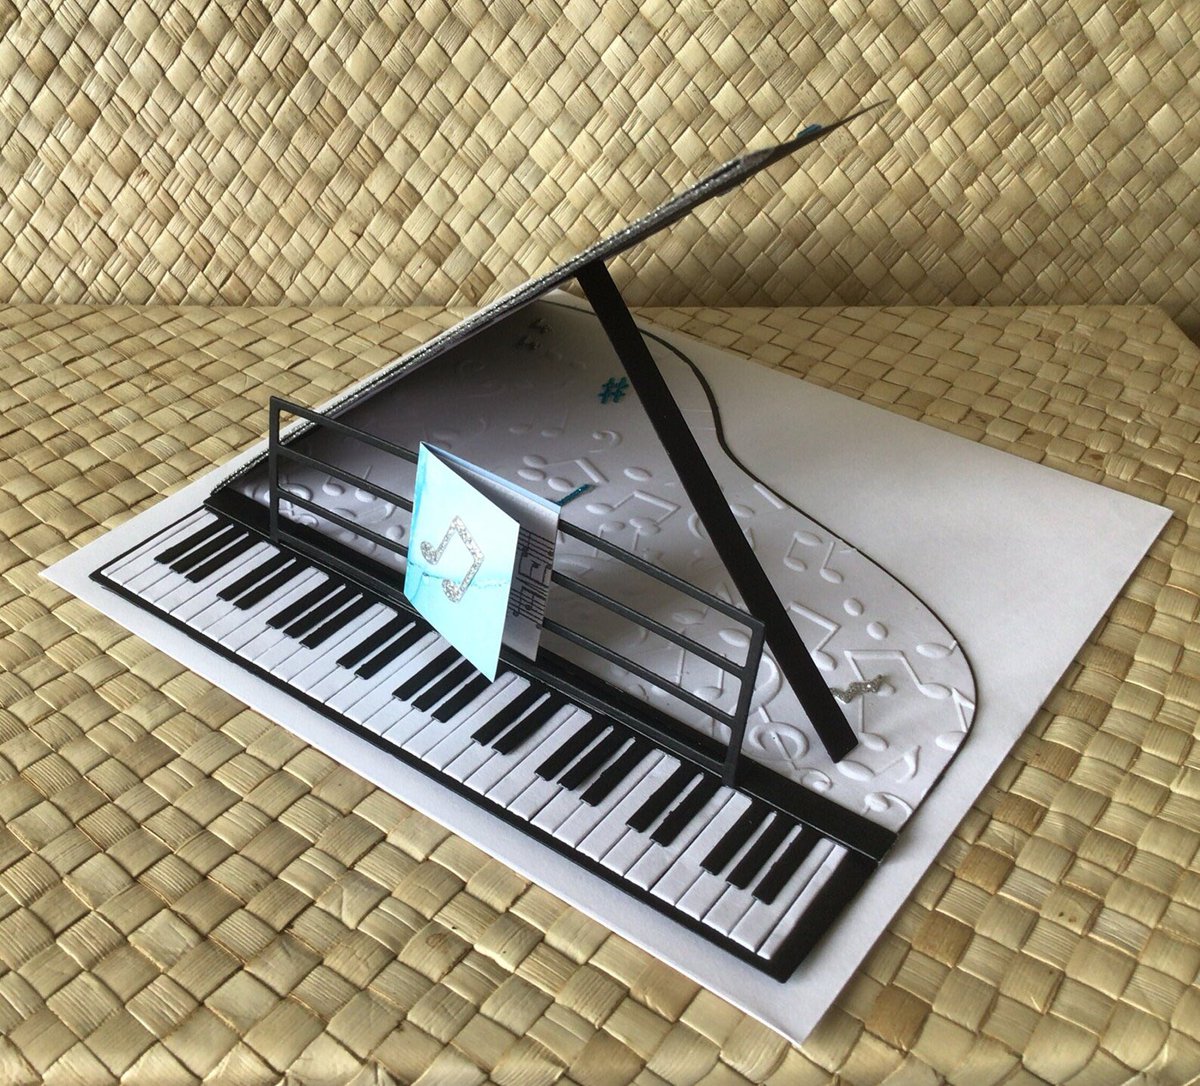 Is your Dad, brother, significant other a piano star?  Make his birthday a unique one with this cool handmade easel card 😎 
etsy.com/uk/listing/143…

#elevenseshour #UKCraftersHour #shopsmallbiz #LincsConnect #pianist #wednesdaythought